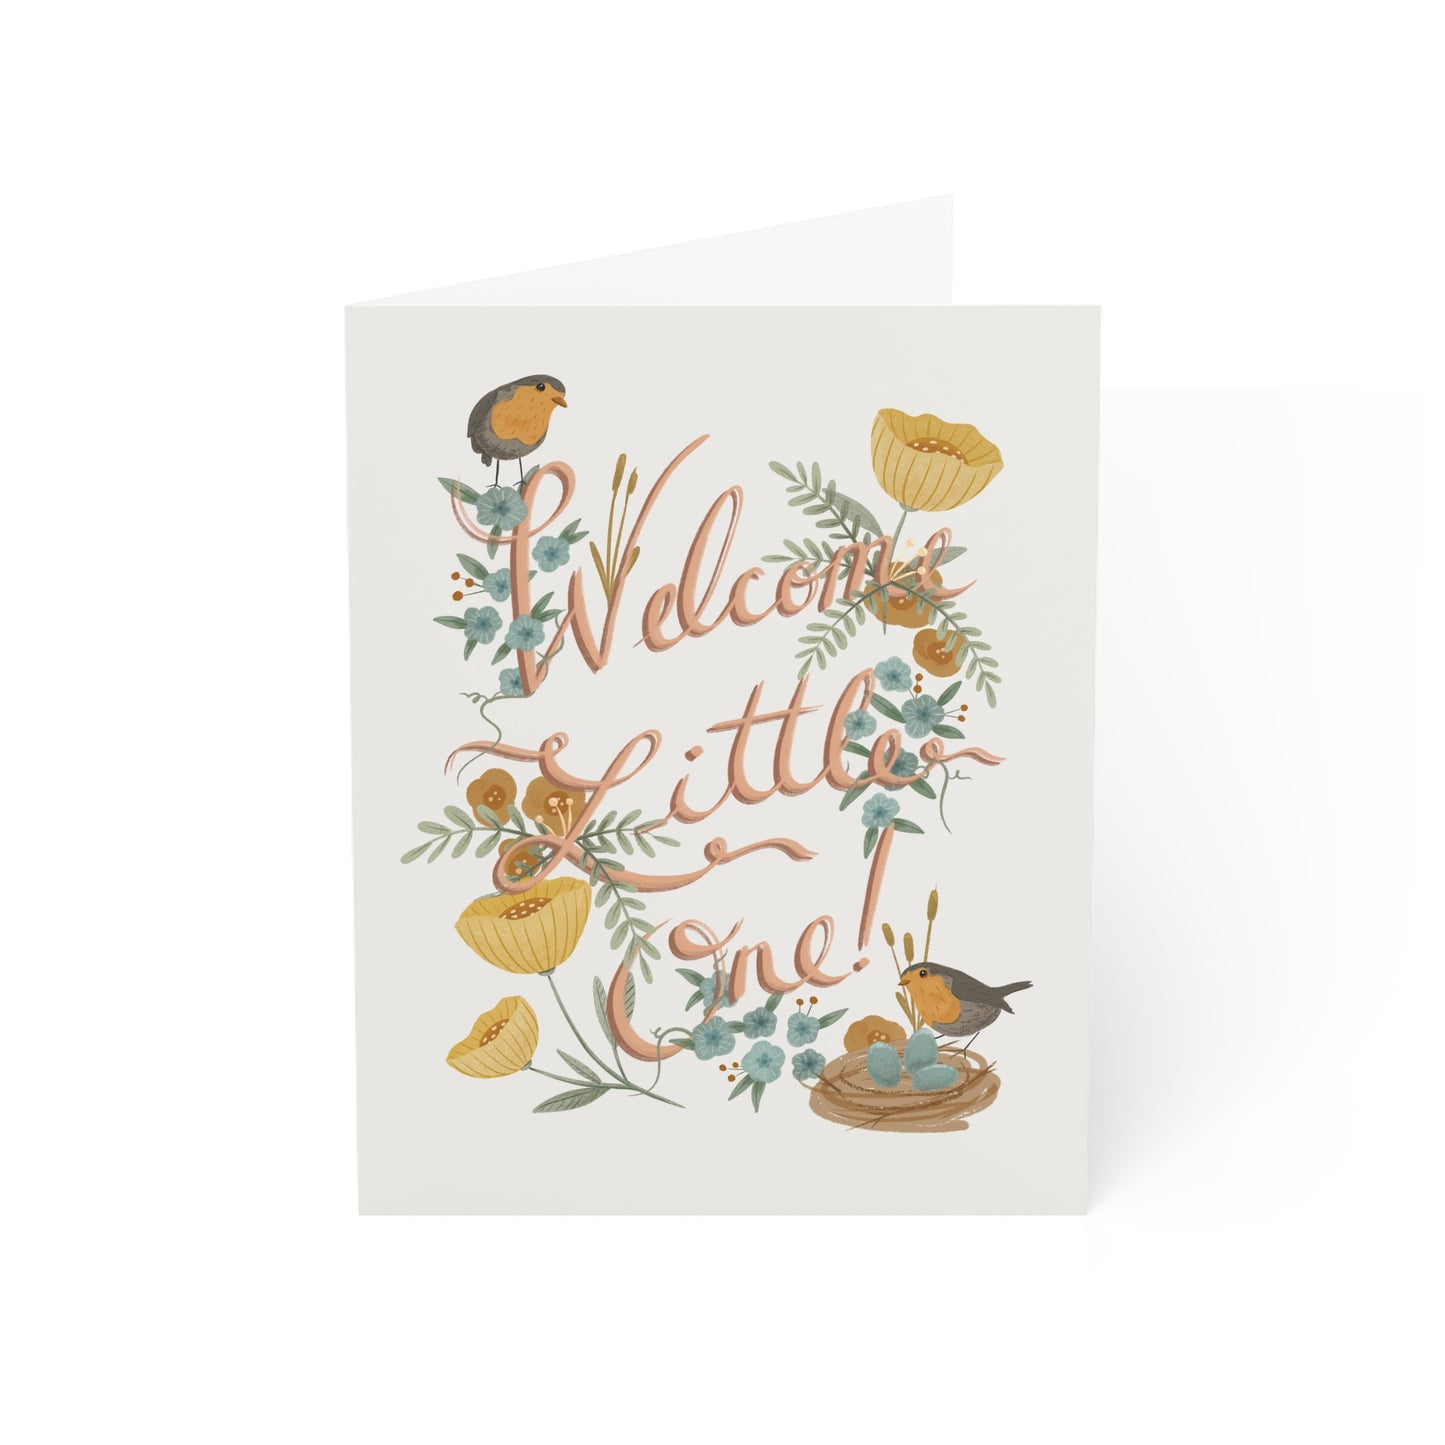 Welcome Little One (White) Greeting Cards (1, 10, 30, and 50pcs)